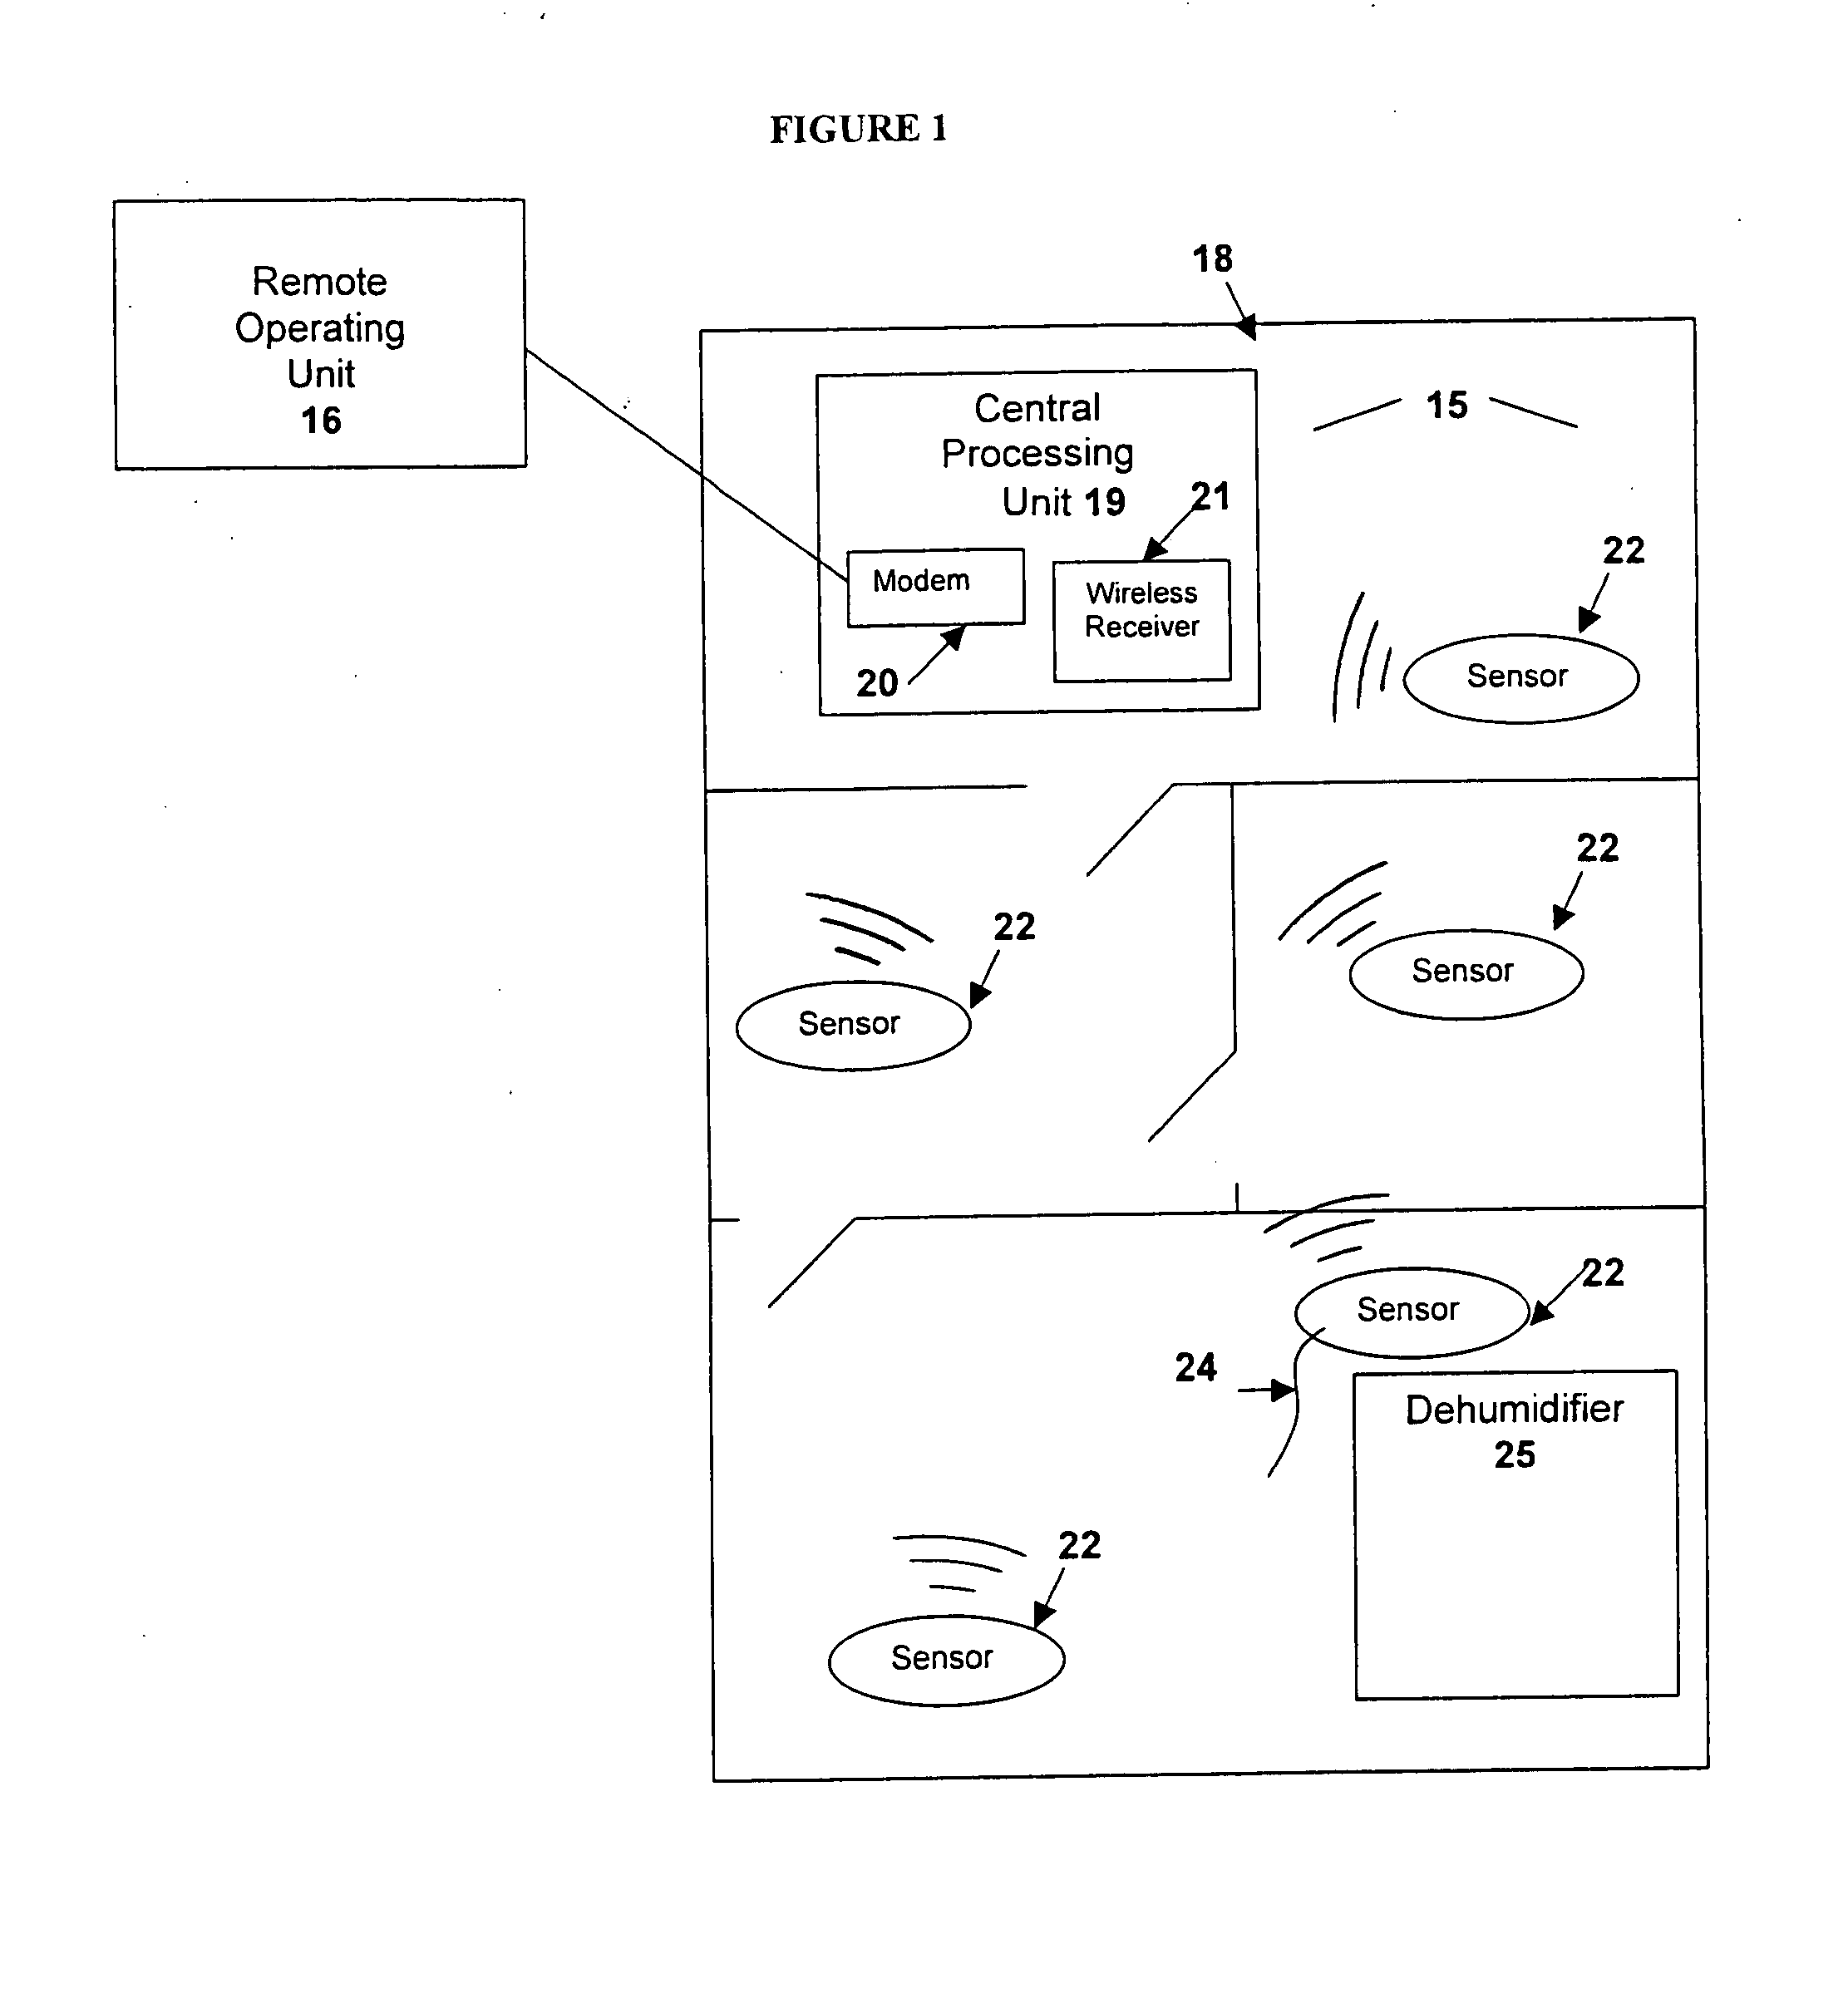 System and apparatus for remote monitoring of conditions in locations undergoing water damage restoration